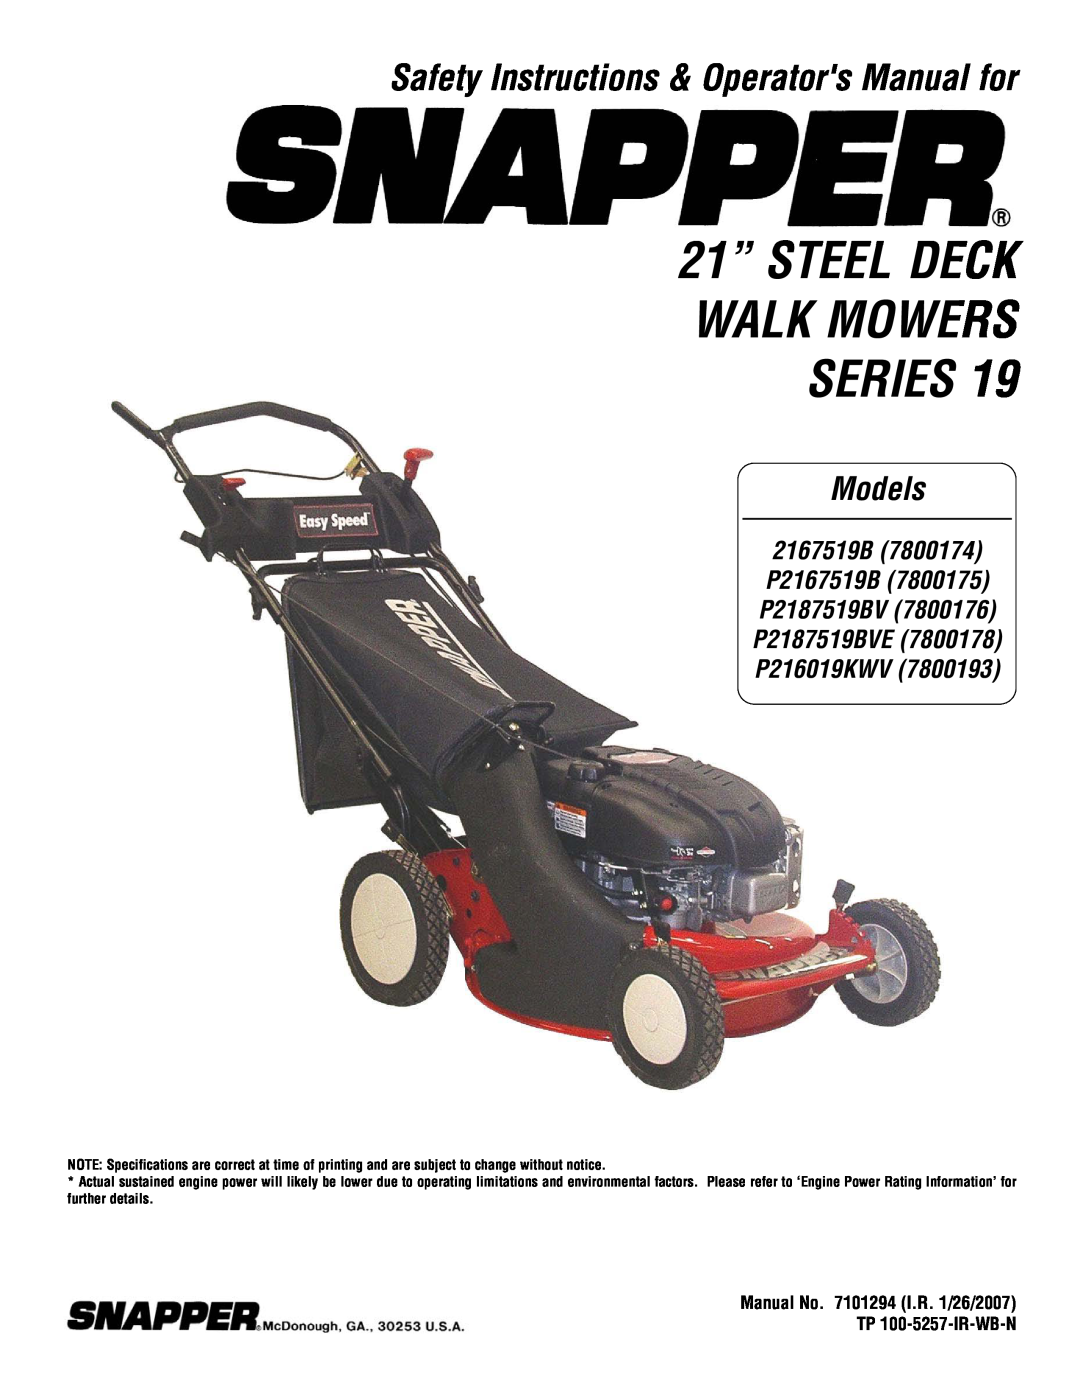 Snapper 2167519B specifications 21” STEEL DECK WALK MOWERS SERIES, Safety Instructions & Operators Manual for, Models 